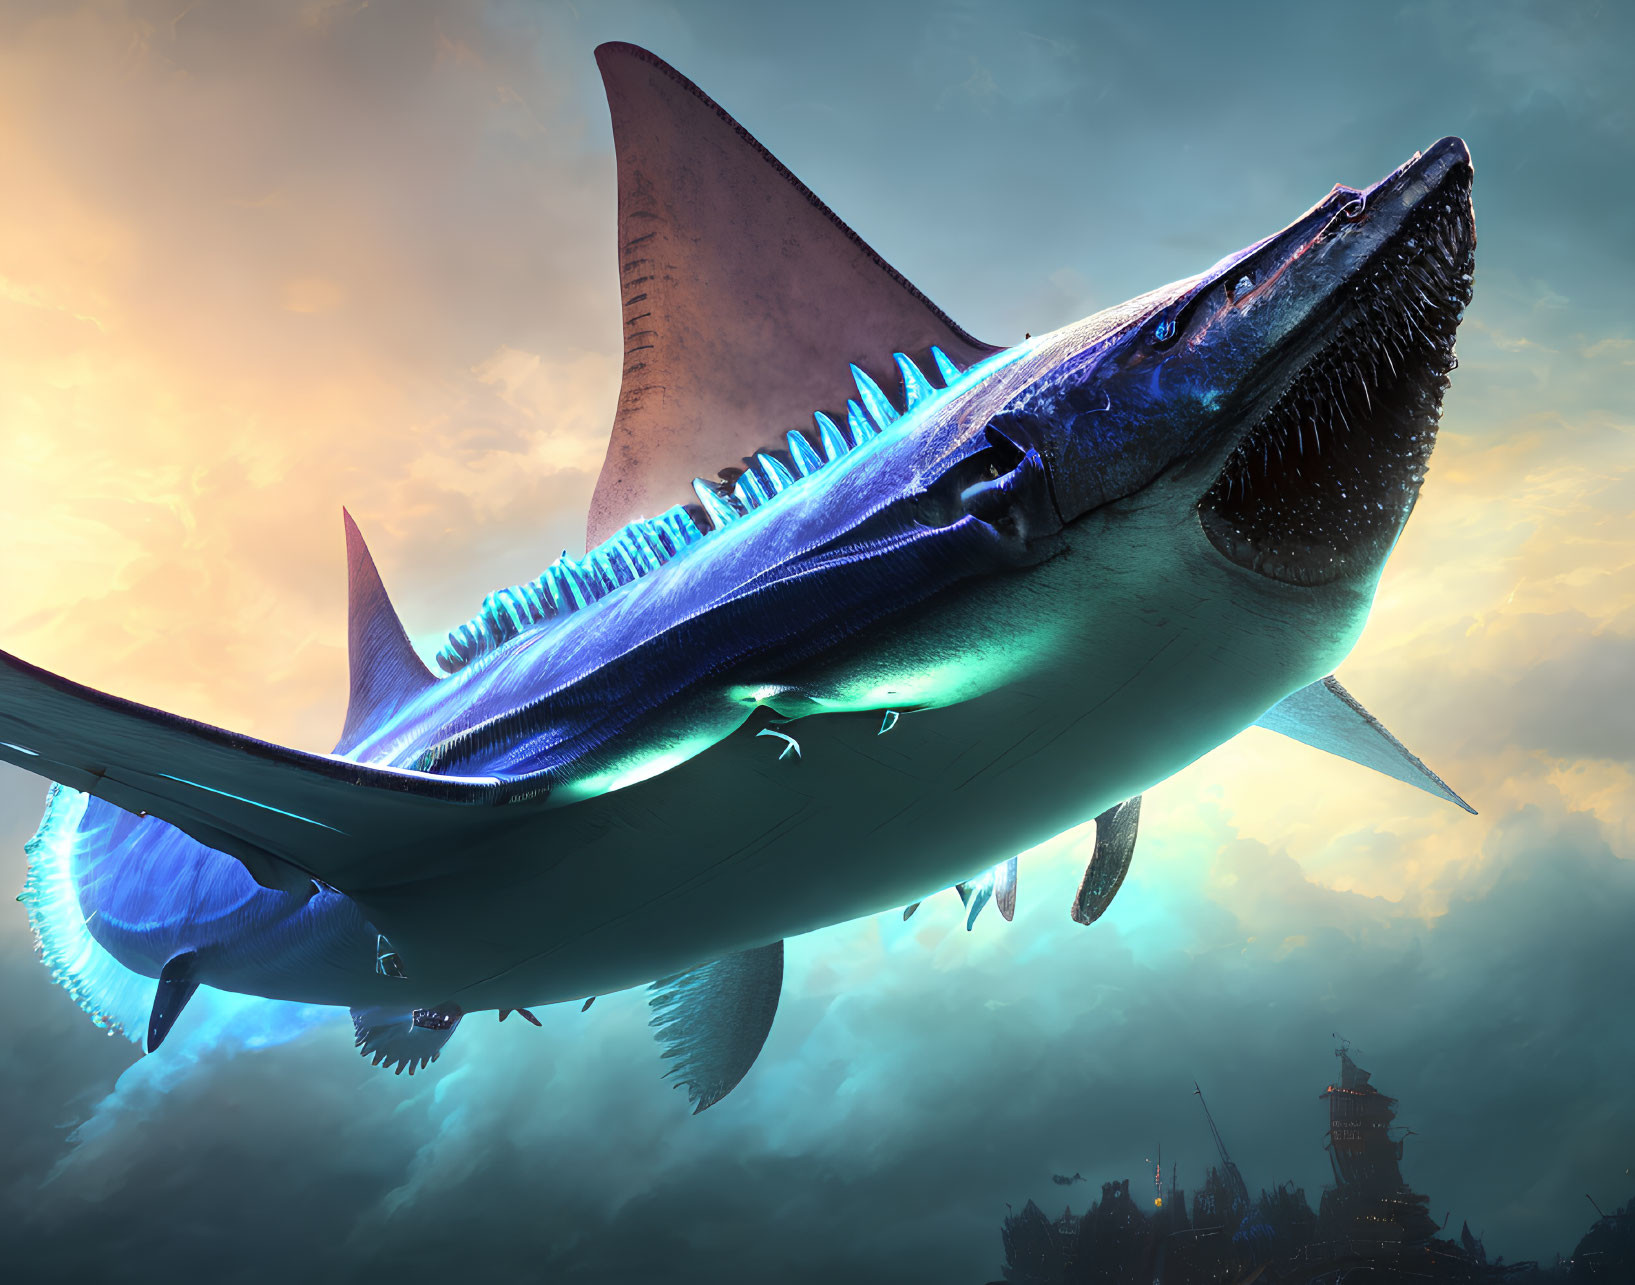 Large blue shark with sharp teeth and spines in mystical ocean scene